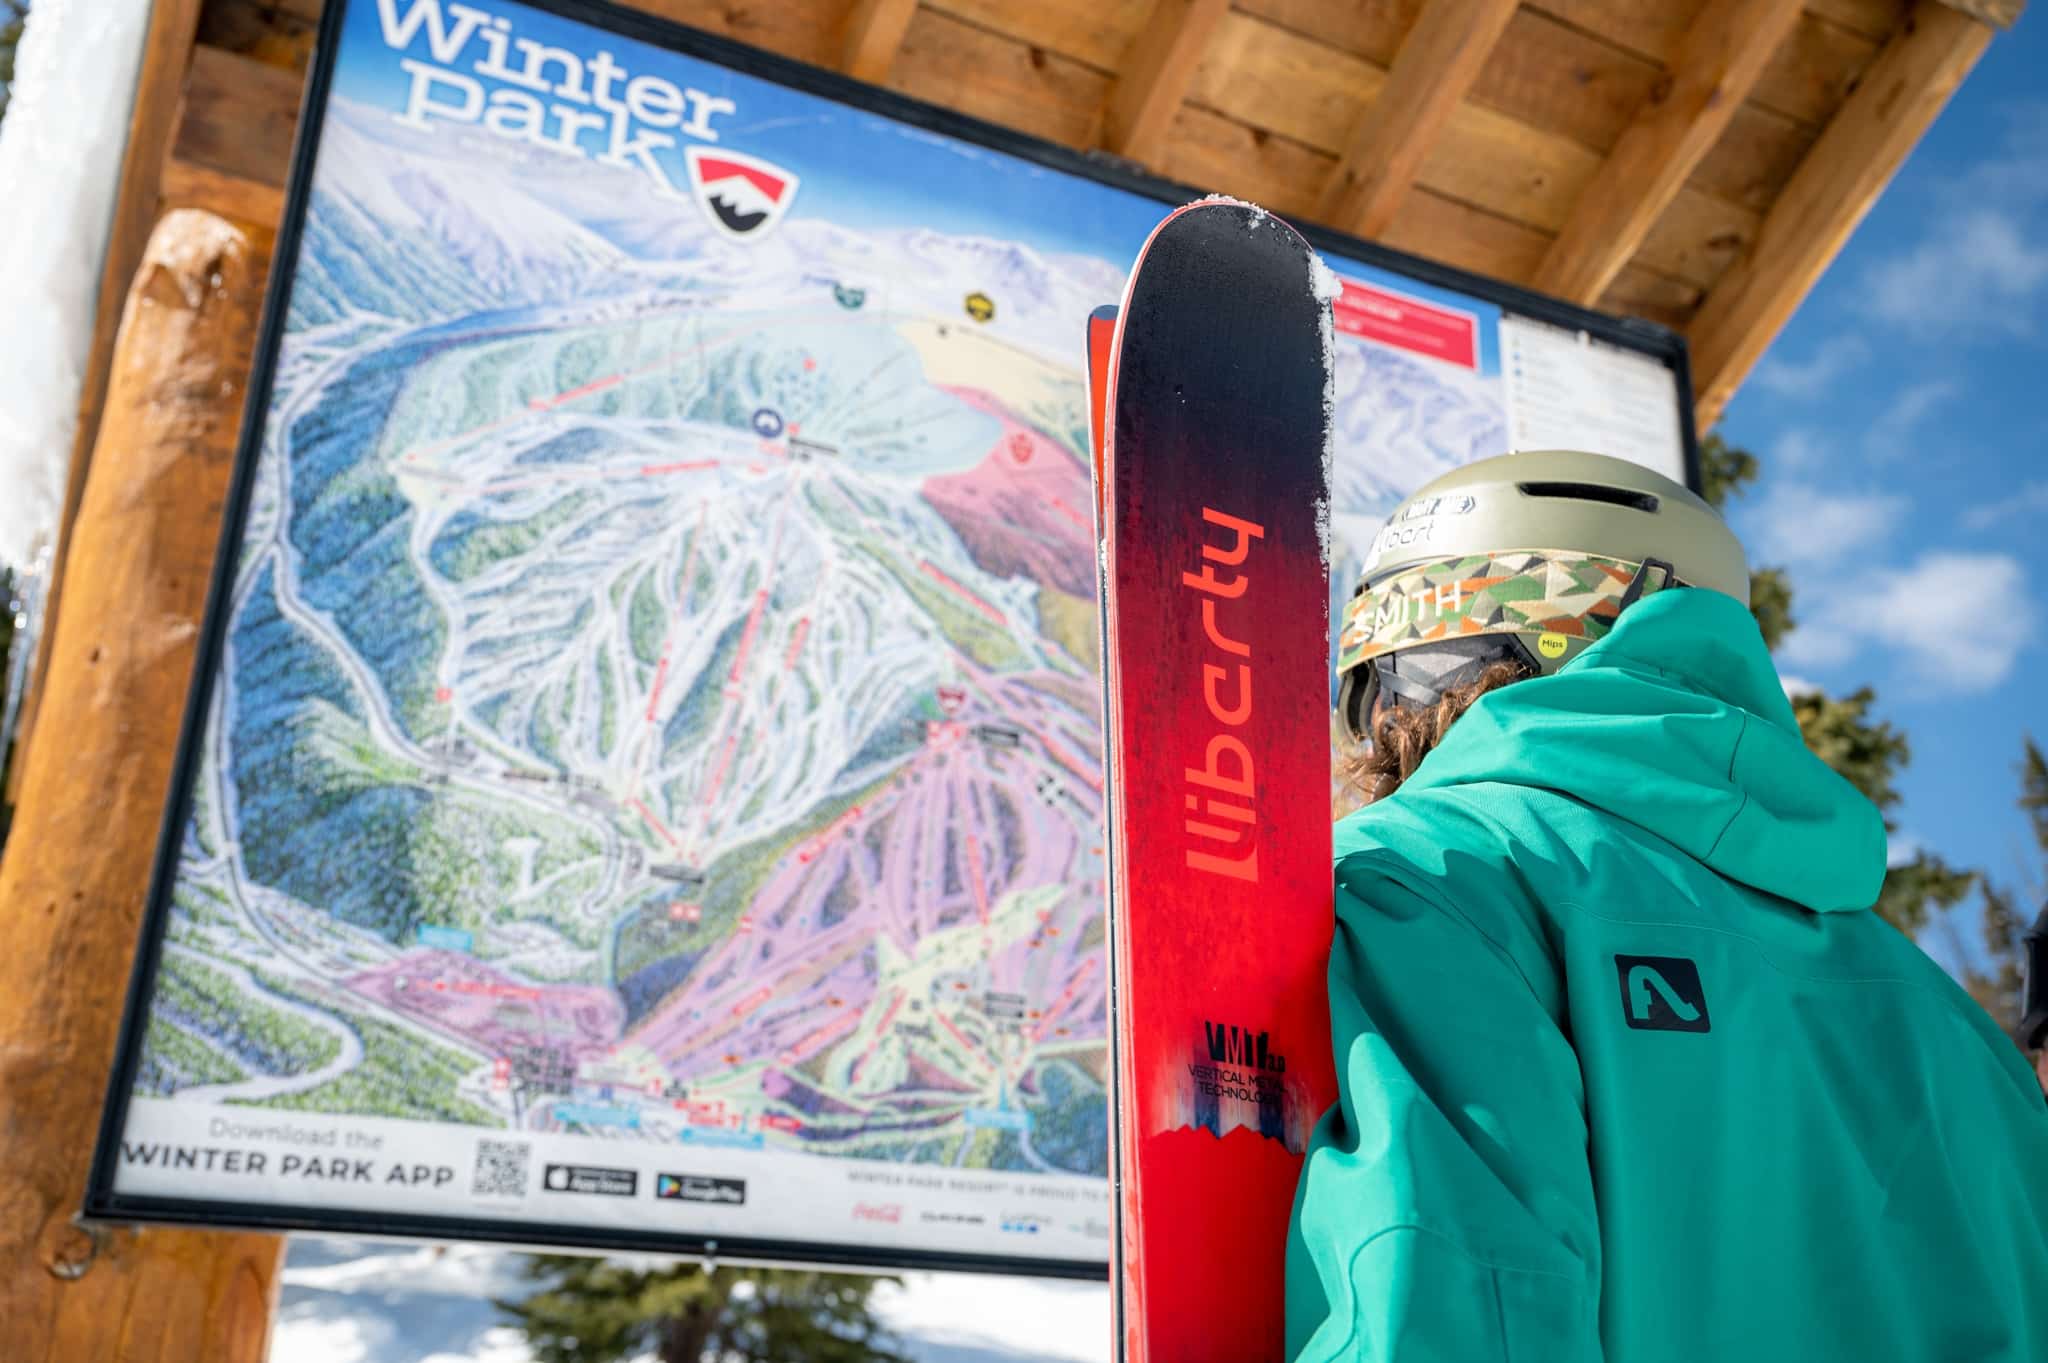 skier in a teal jacket standing in front of Winter Park slope map holding red Liberty skis